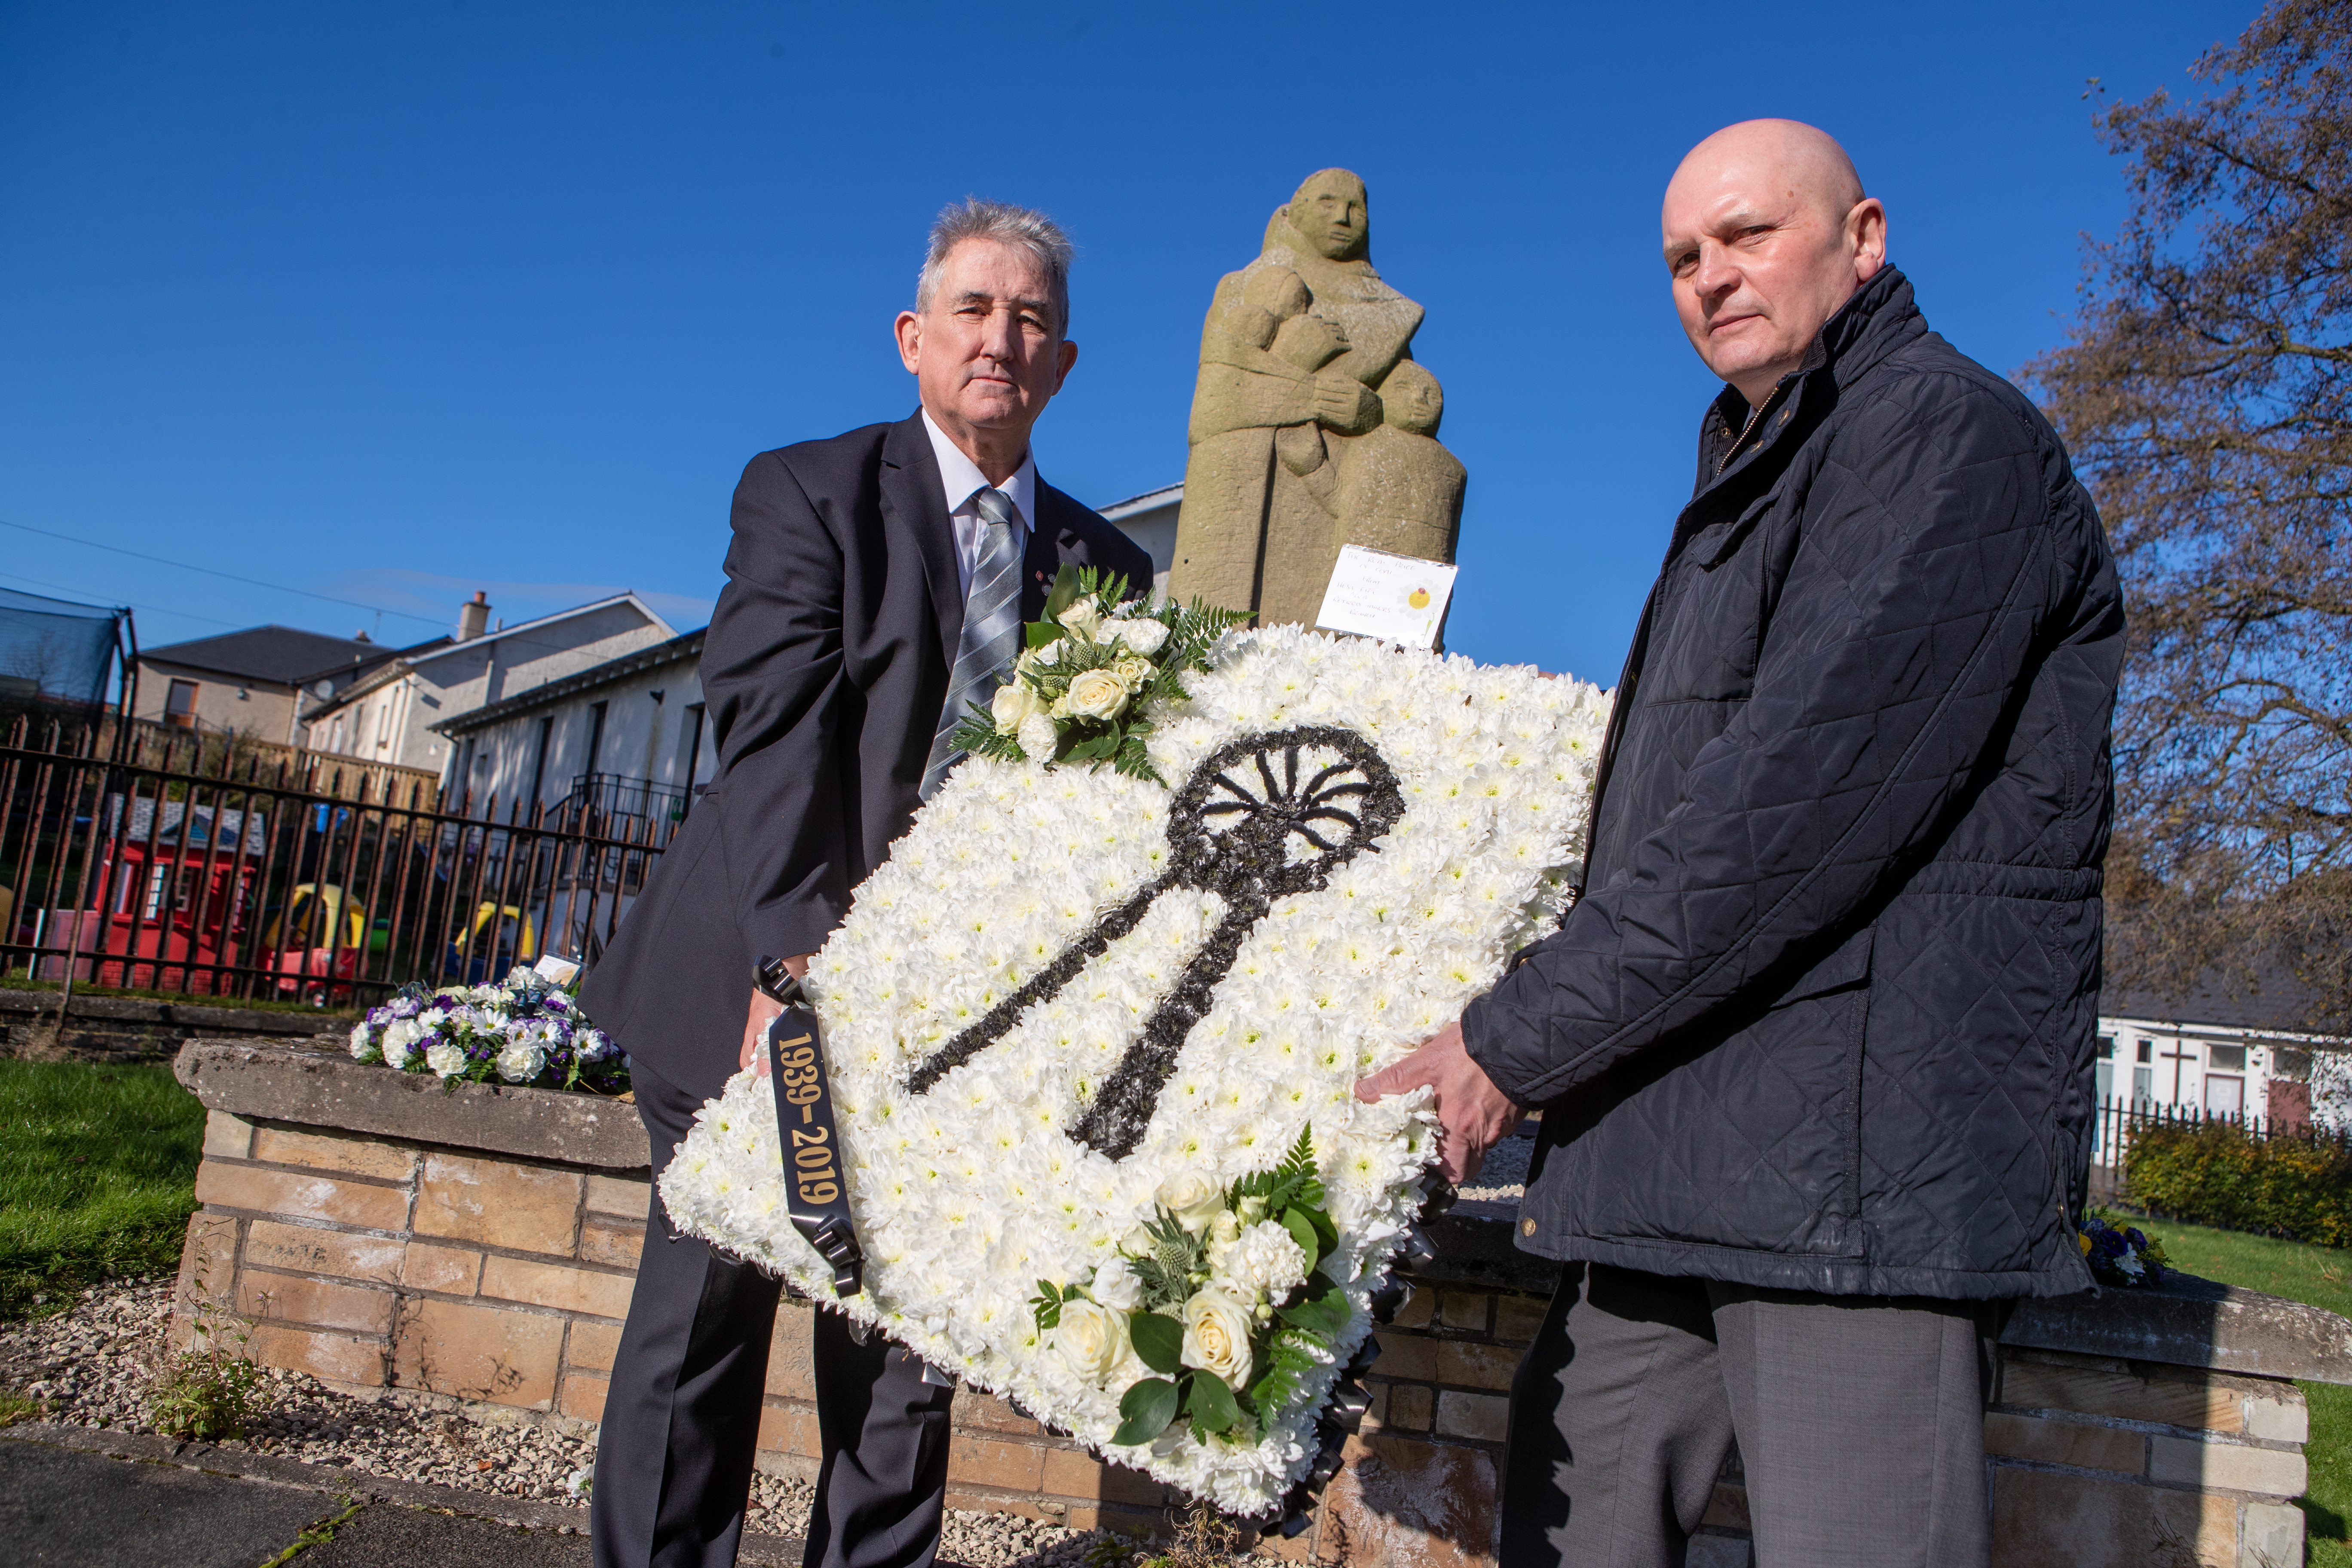 Rab McKenzie Chair of Valleyfield Heritage and Cllr Bobby Clelland, Retired Miners West Fife Branch lay a wreath following the ceremony in memory of those who lost their lives in the disaster